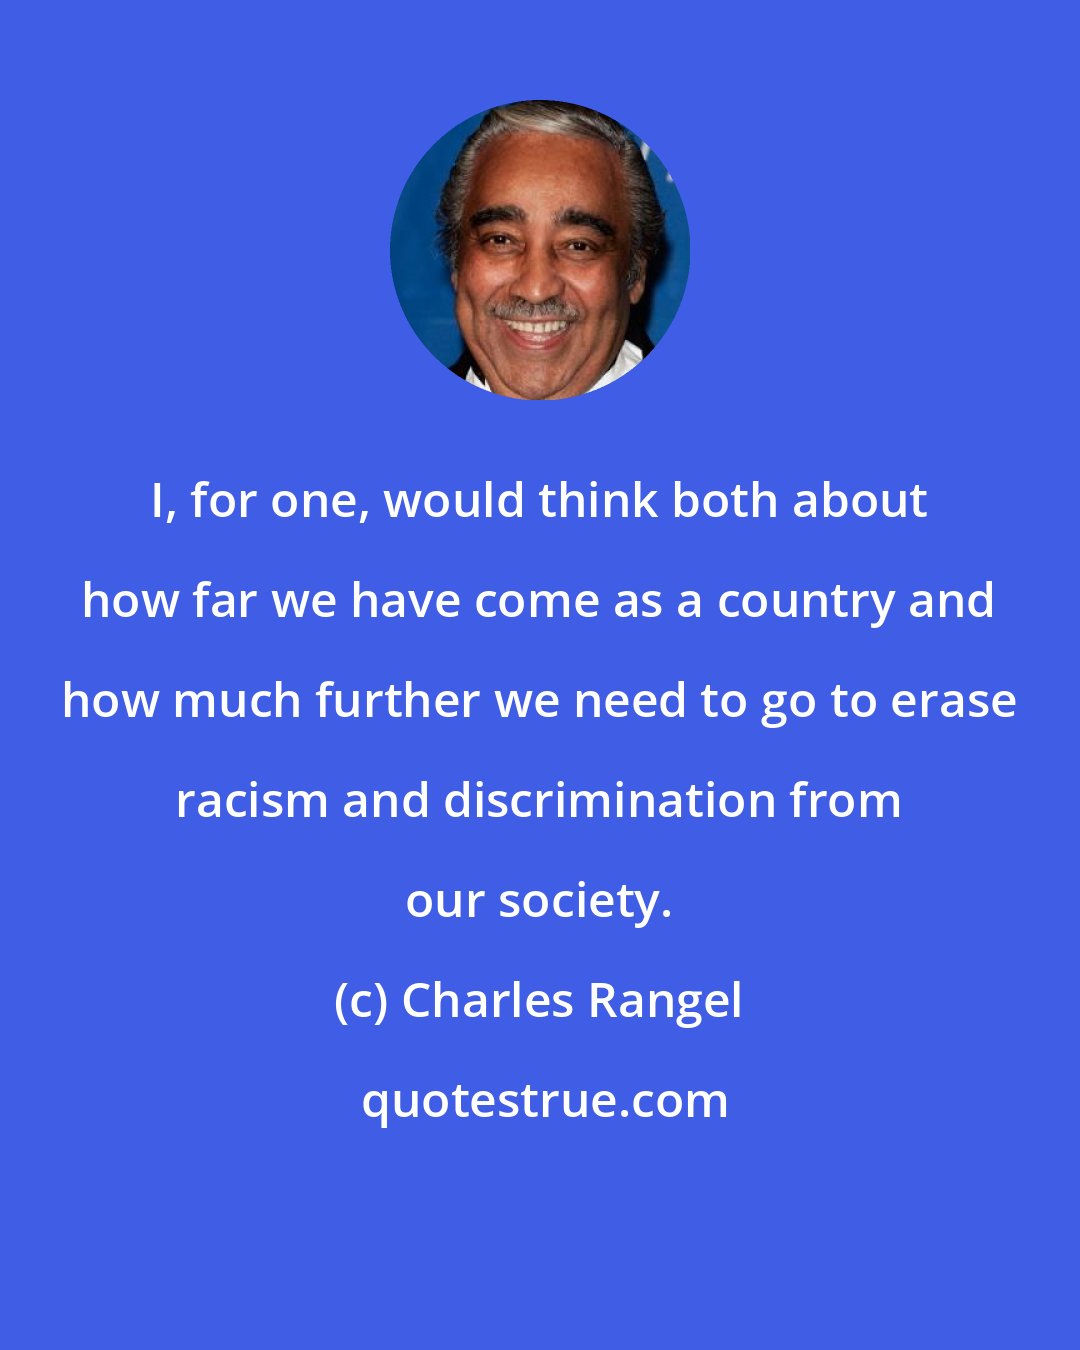 Charles Rangel: I, for one, would think both about how far we have come as a country and how much further we need to go to erase racism and discrimination from our society.